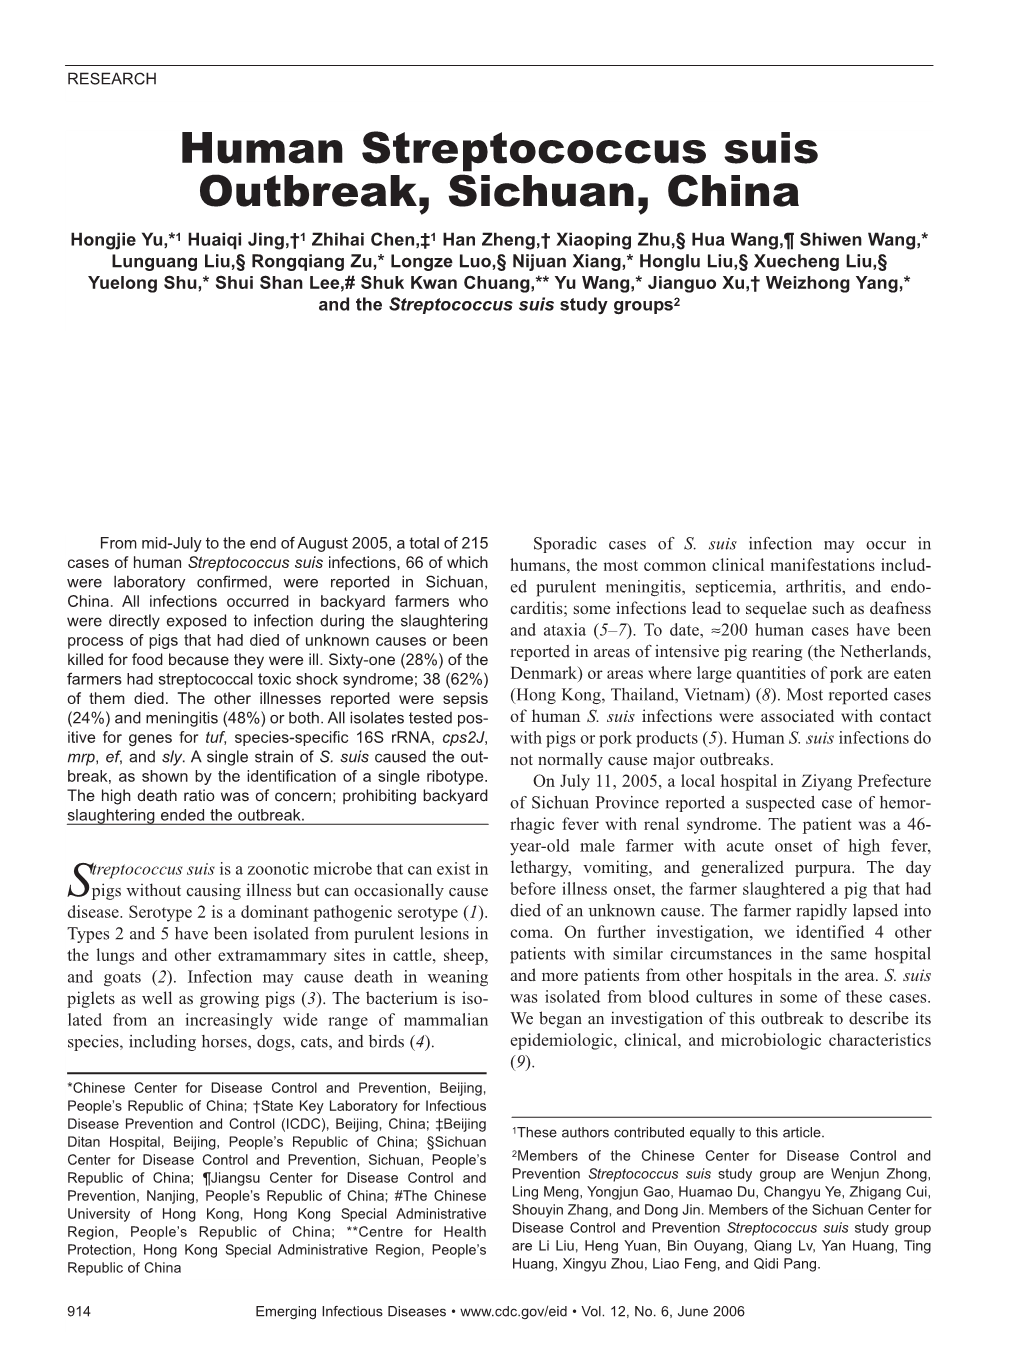 Human Streptococcus Suis Outbreak, Sichuan, China